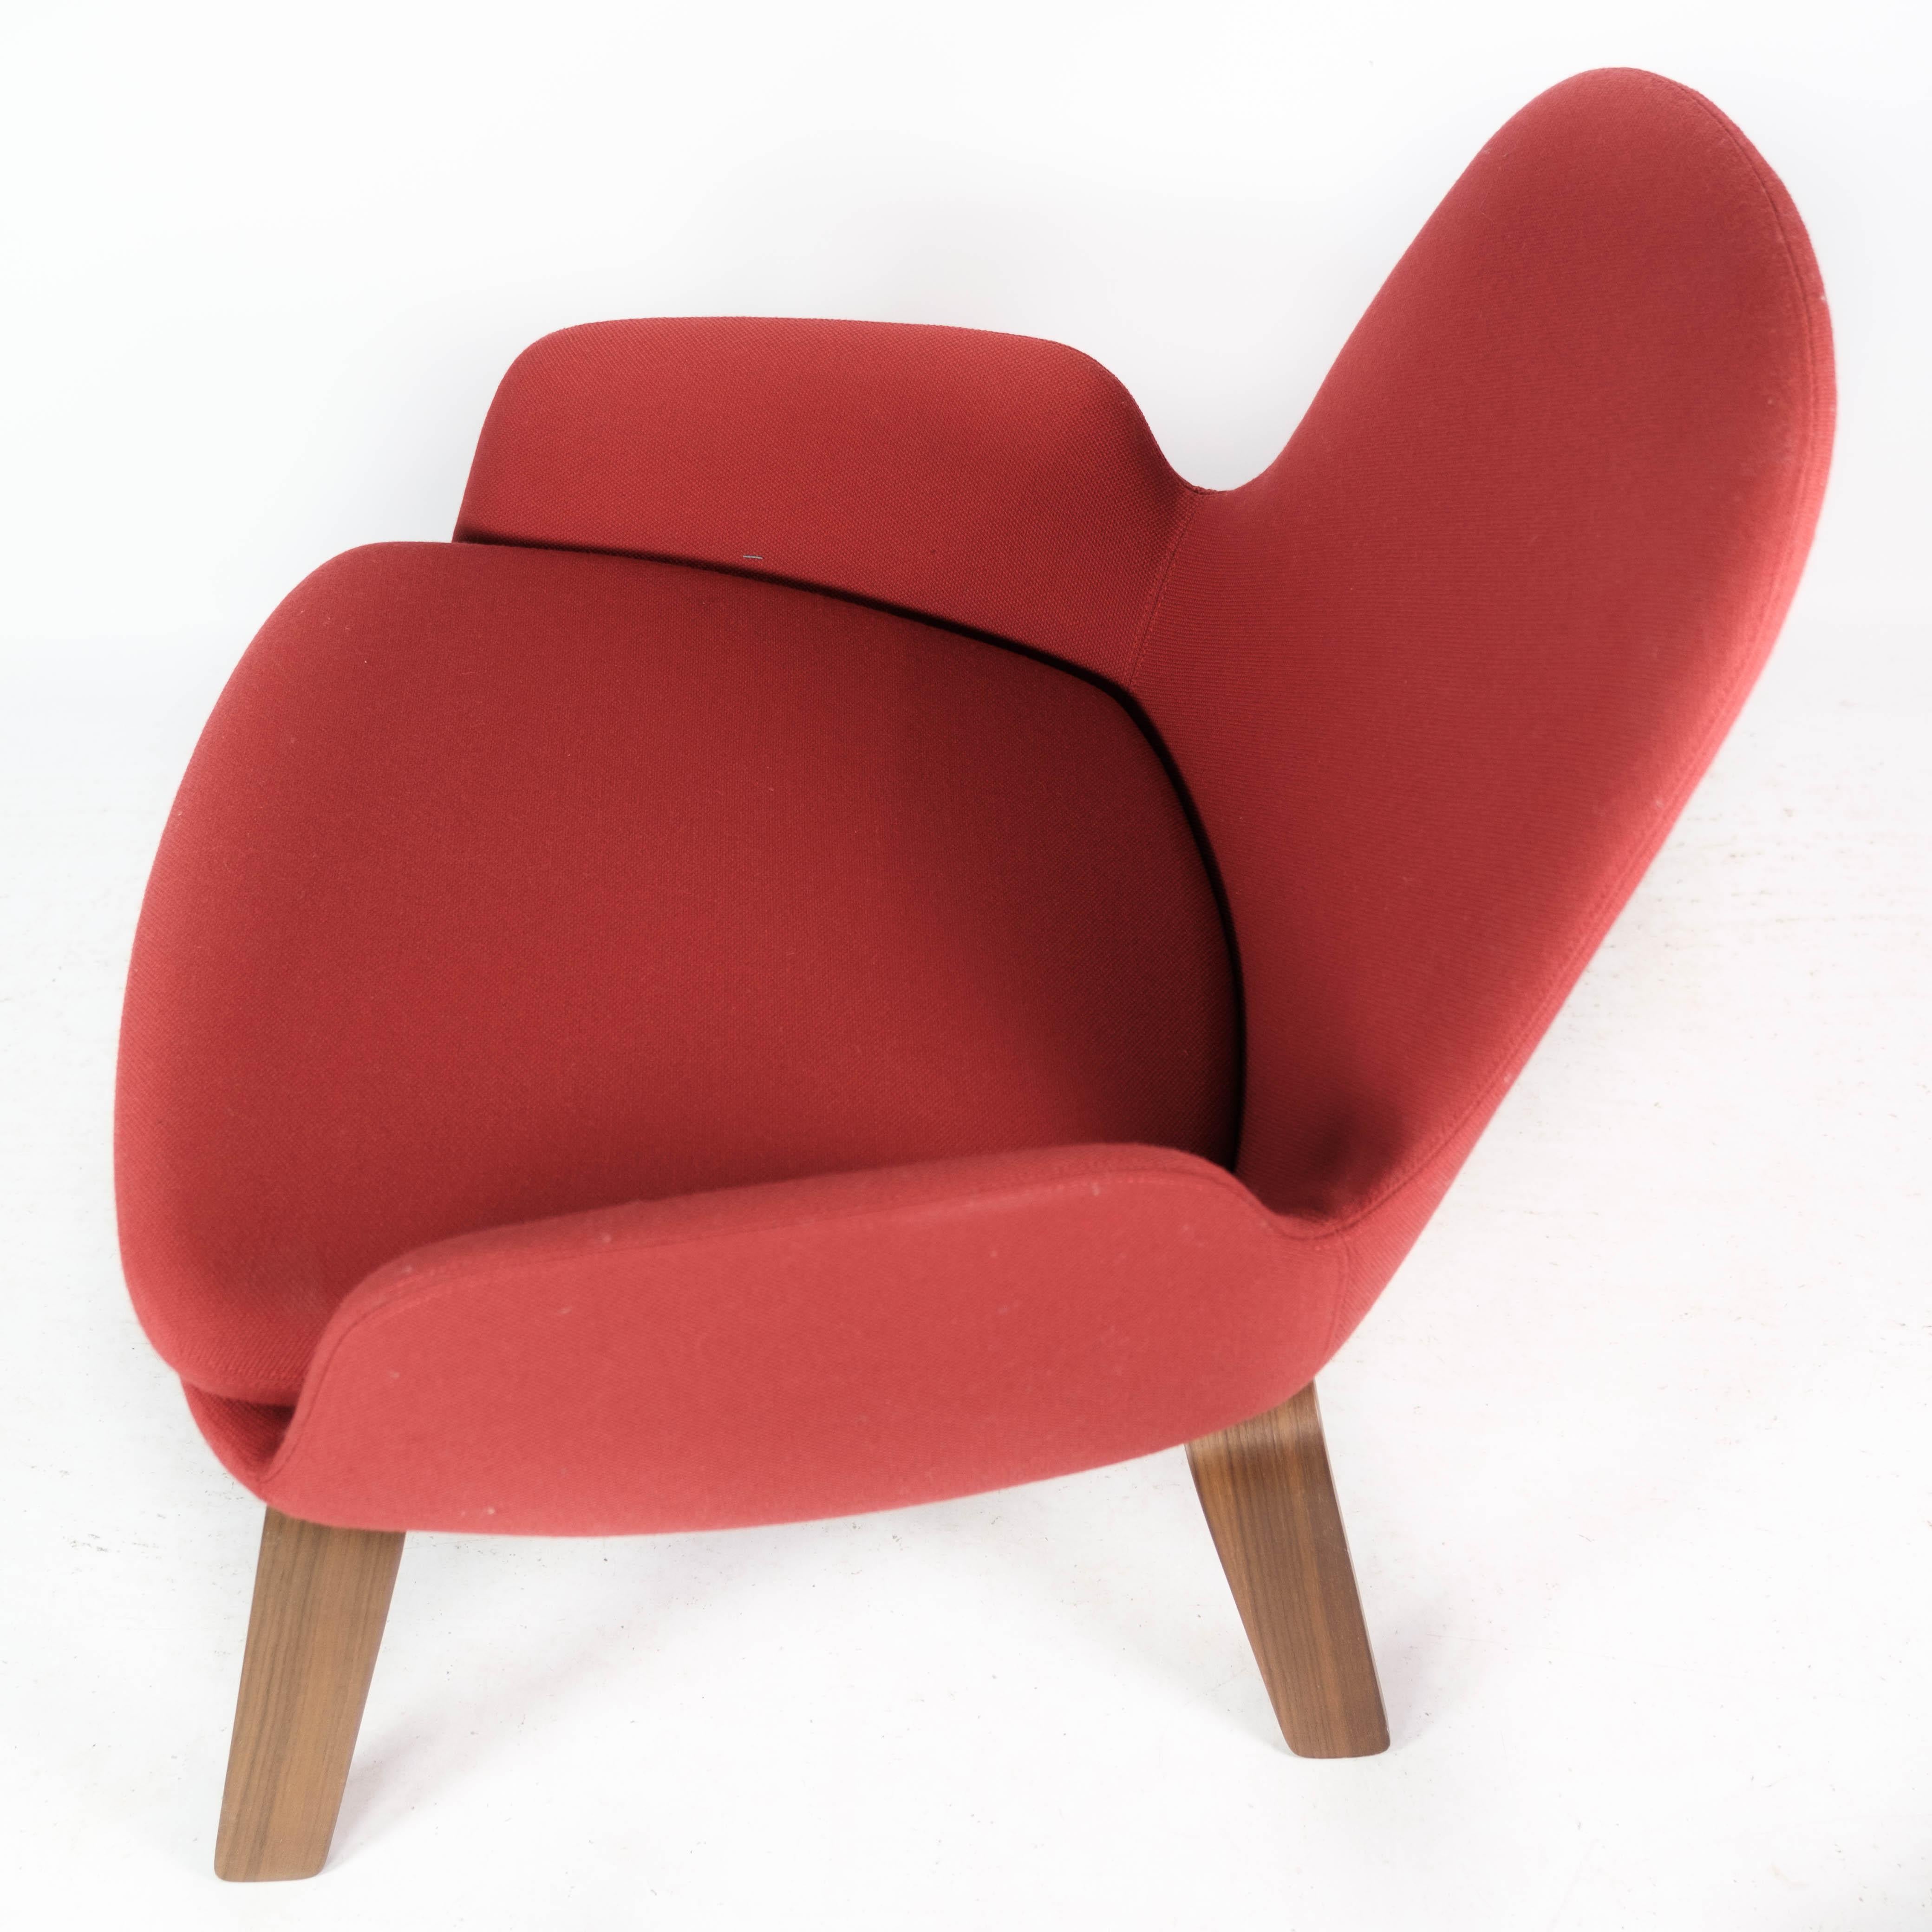 Mid-20th Century Easy Chair with Legs of Walnut by Normann Copenhagen For Sale